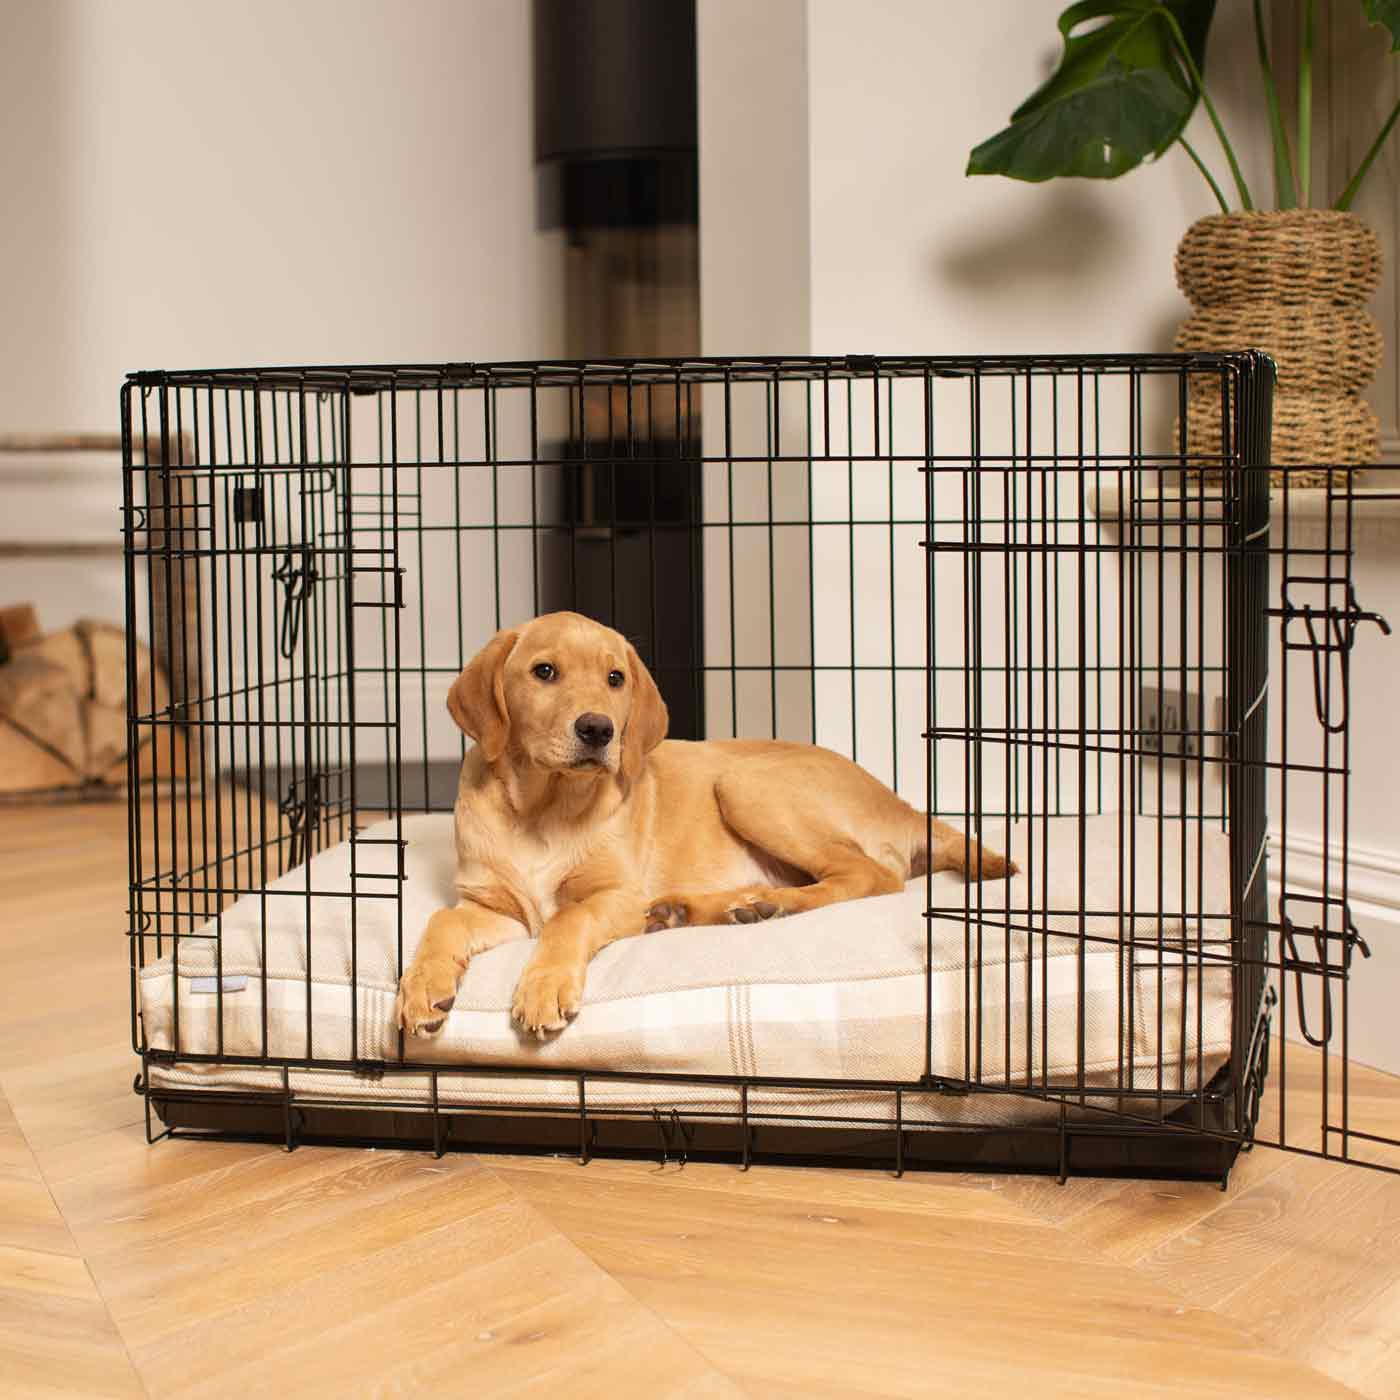 Luxury Black Dog Cage Set With Cushion, The Perfect Dog Cage For The Ultimate Naptime, Now Available To Personalize at Lords & Labradors US